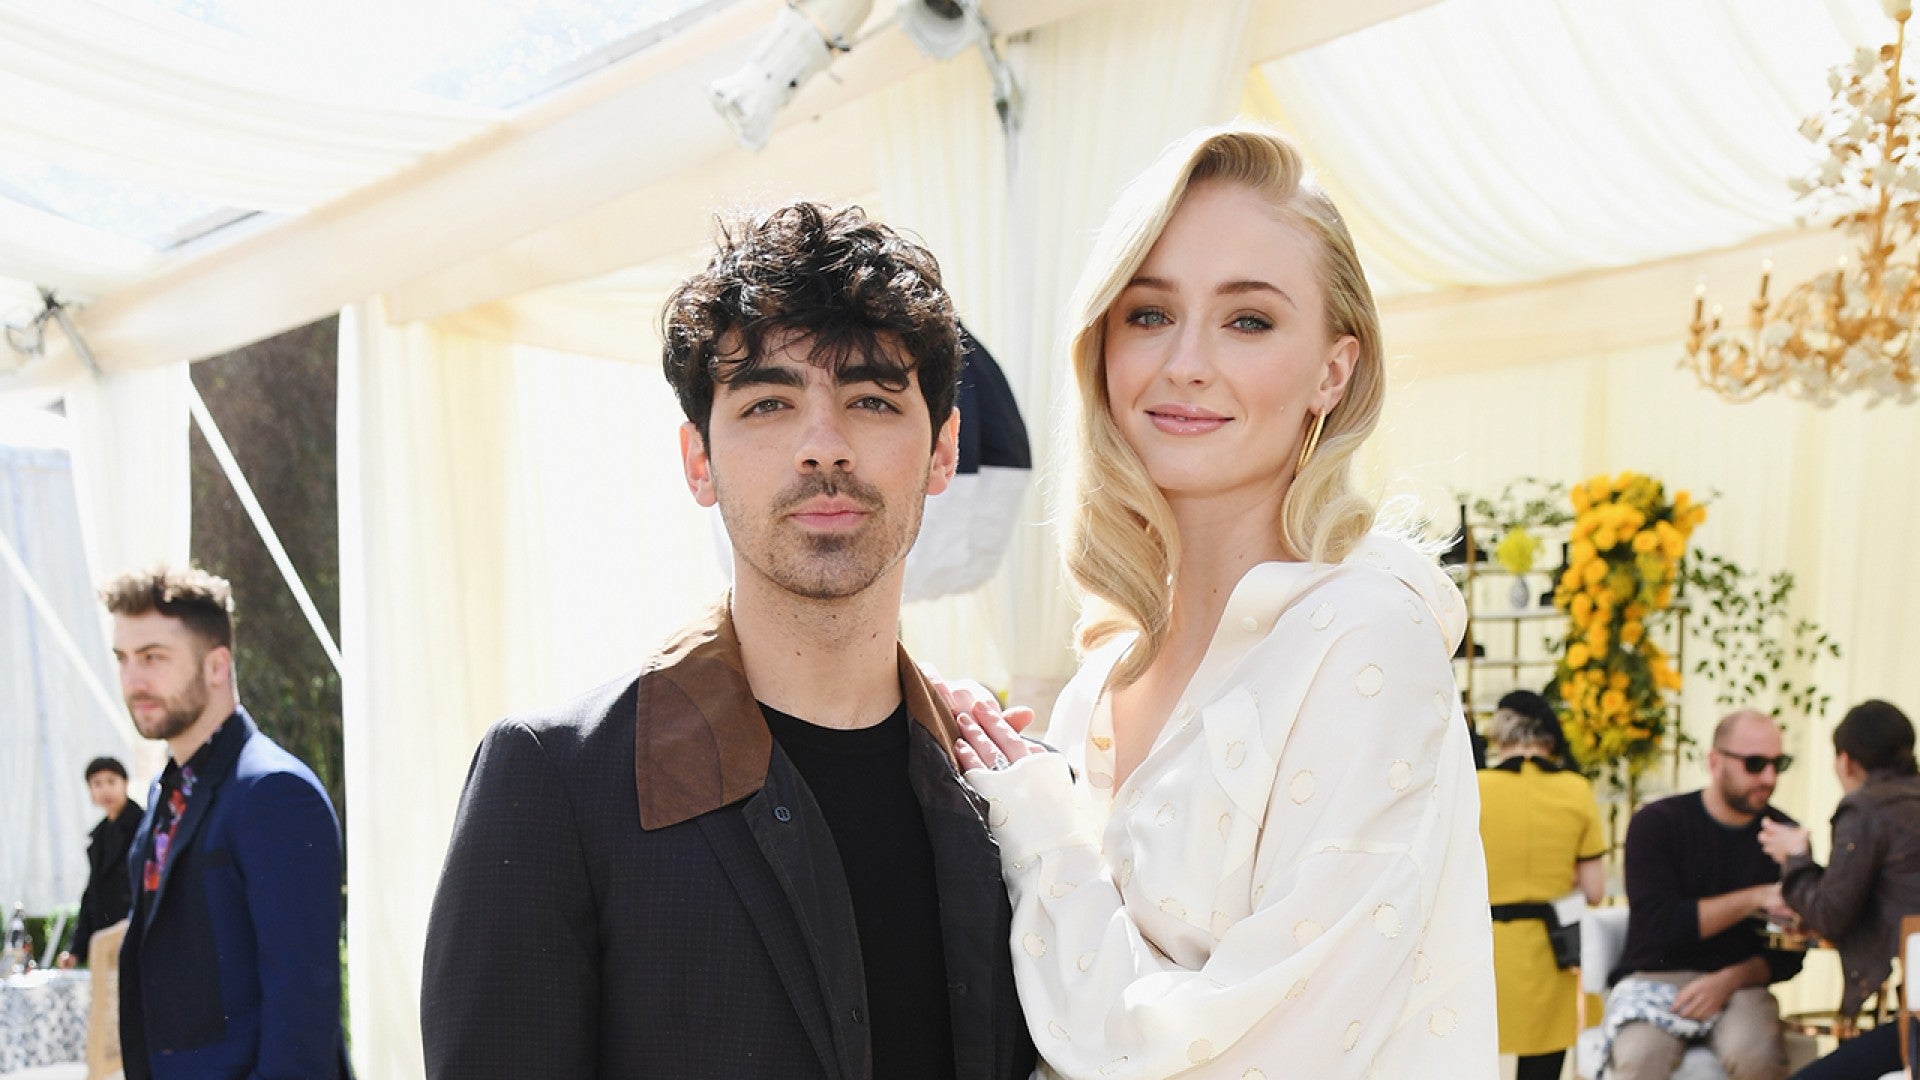 Sophie Turner in Louis Vuitton jumpsuit at Billboard Awards, fiance Joe  Jonas arrives with brothers